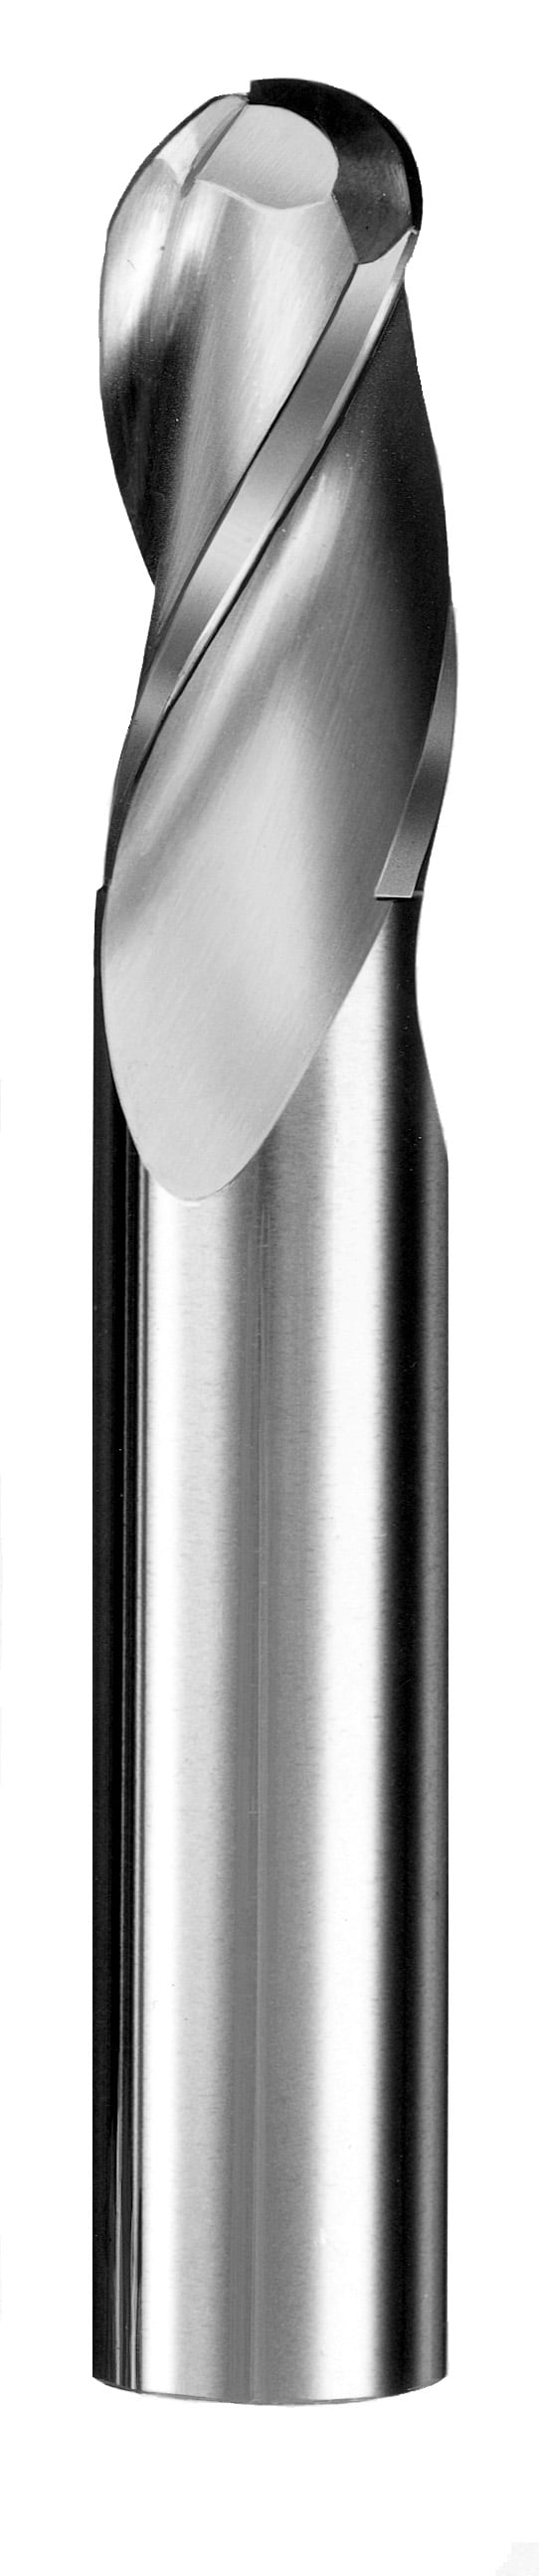 5/16" Dia, 3 Flute, Ball Nose End Mill - 30540